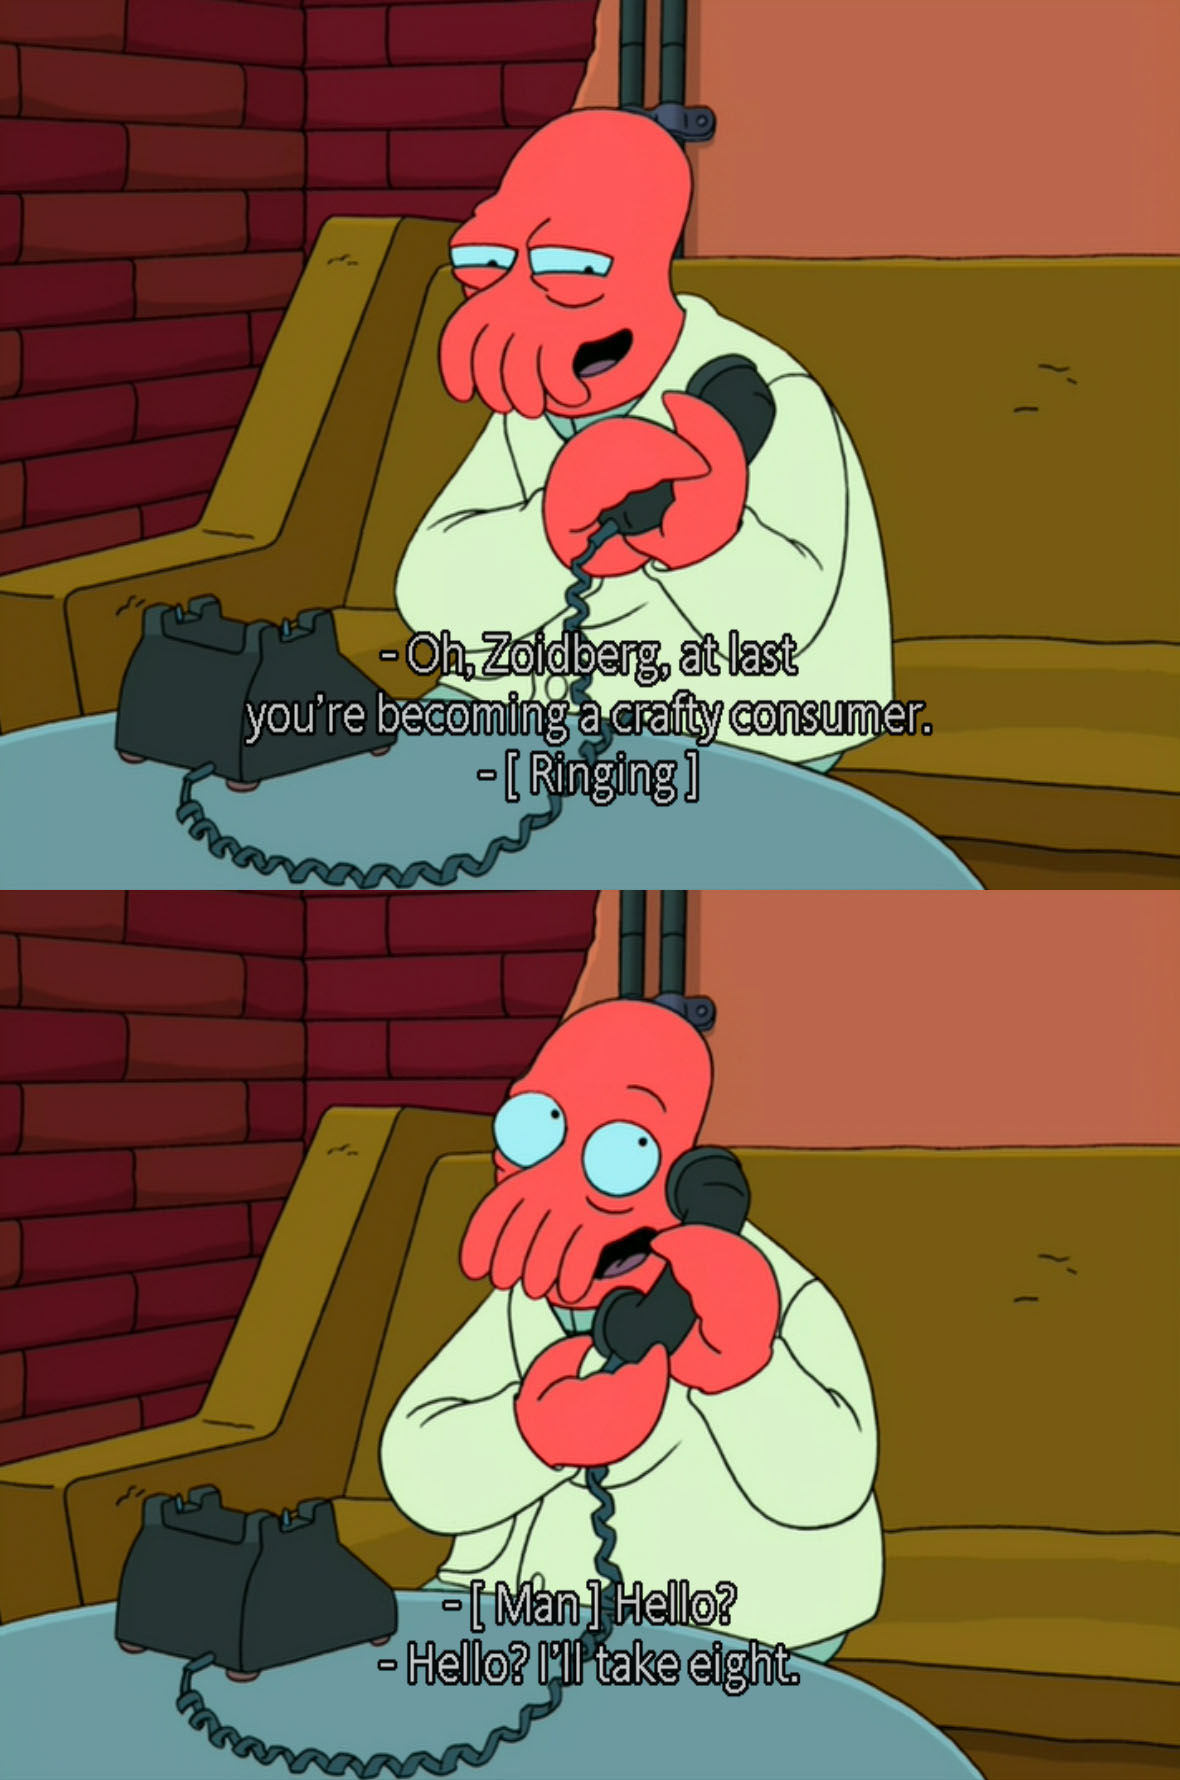 Zoidberg Is Part Of Normal Society By Being a Crafty ...
